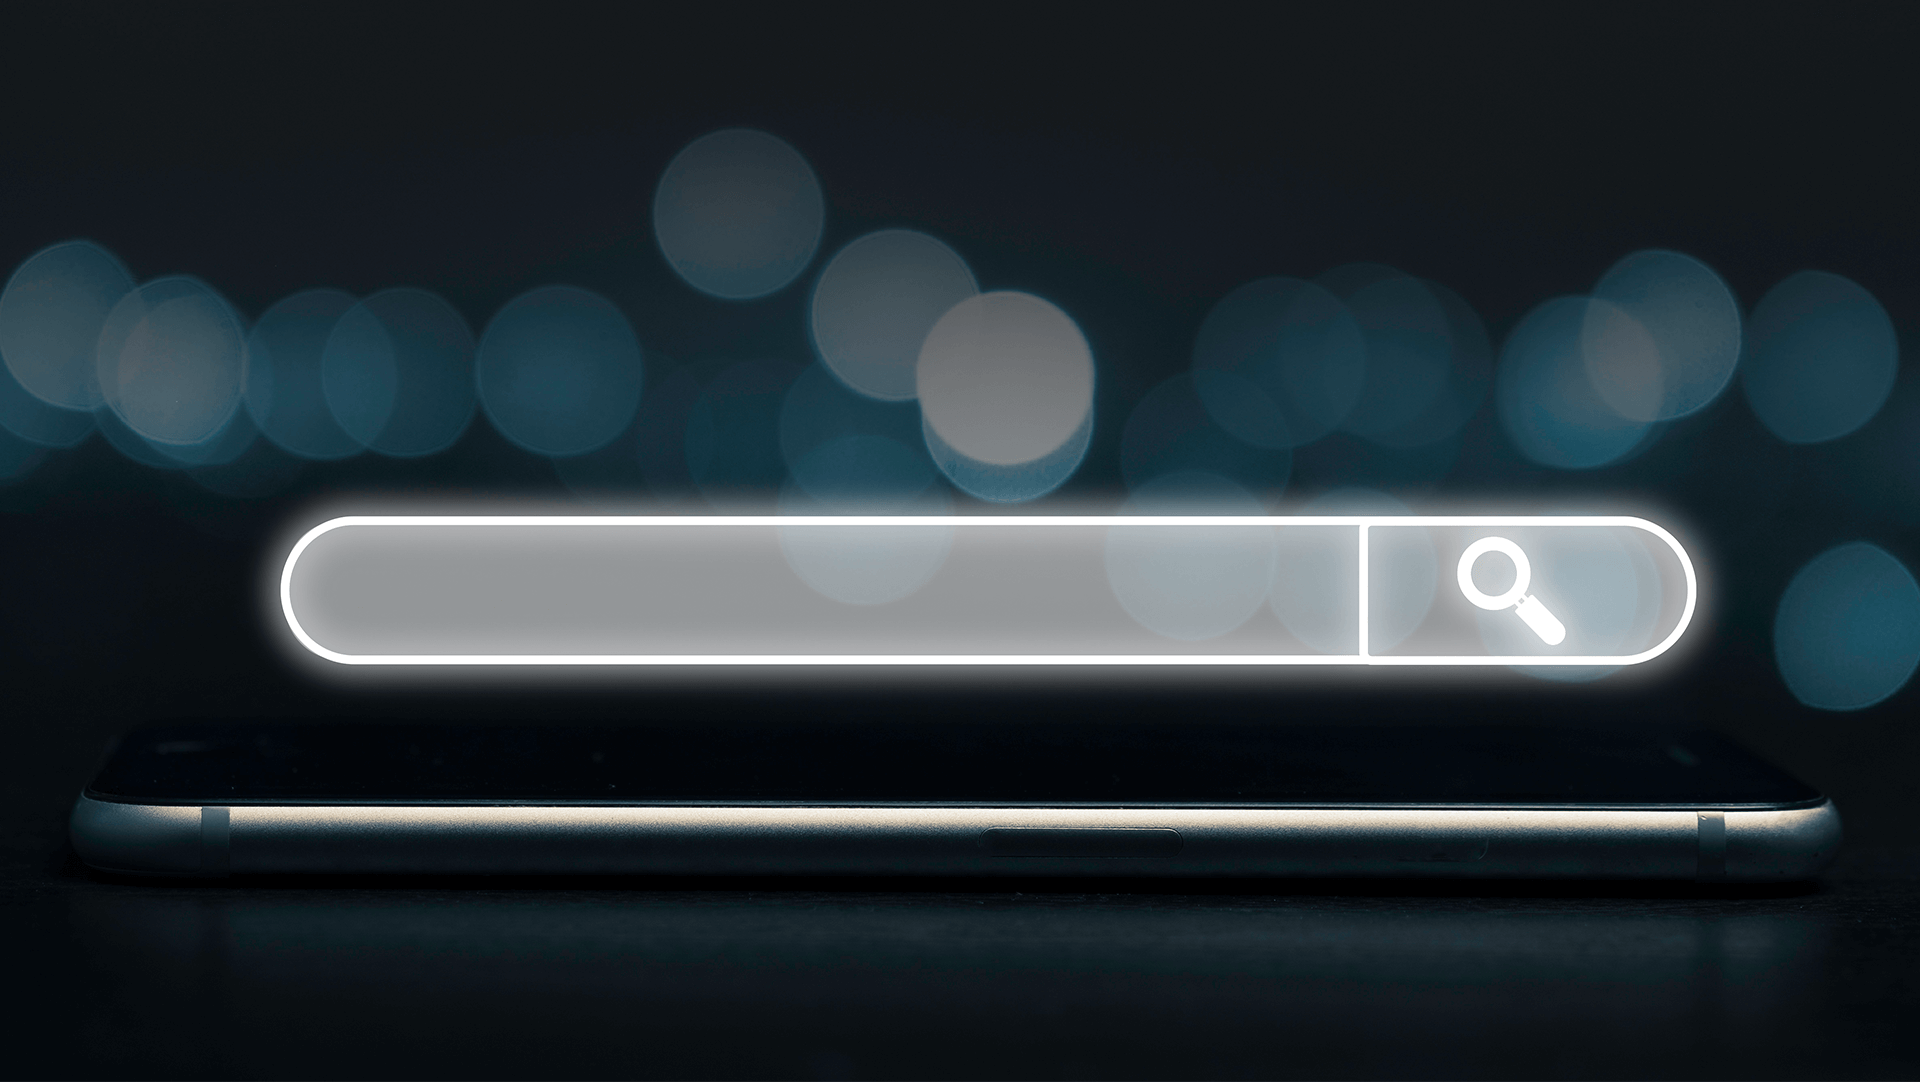 A digital search bar concept floating above a smartphone against a blurred light background, symbolizing advanced technology and information search.